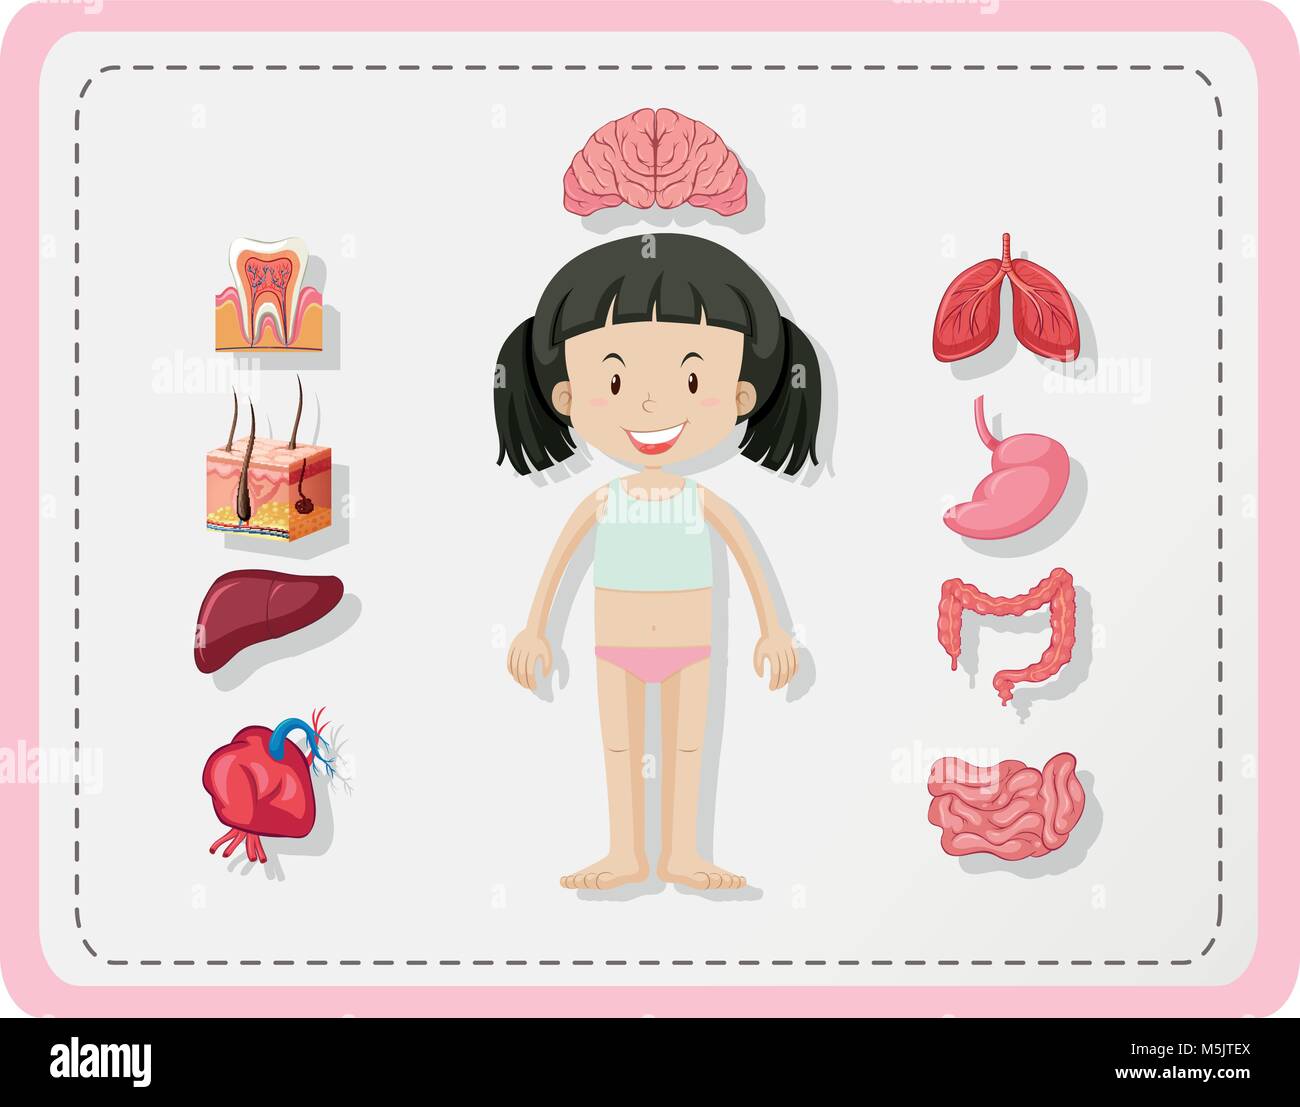 Diagram showing human parts of girl illustration Stock Vector